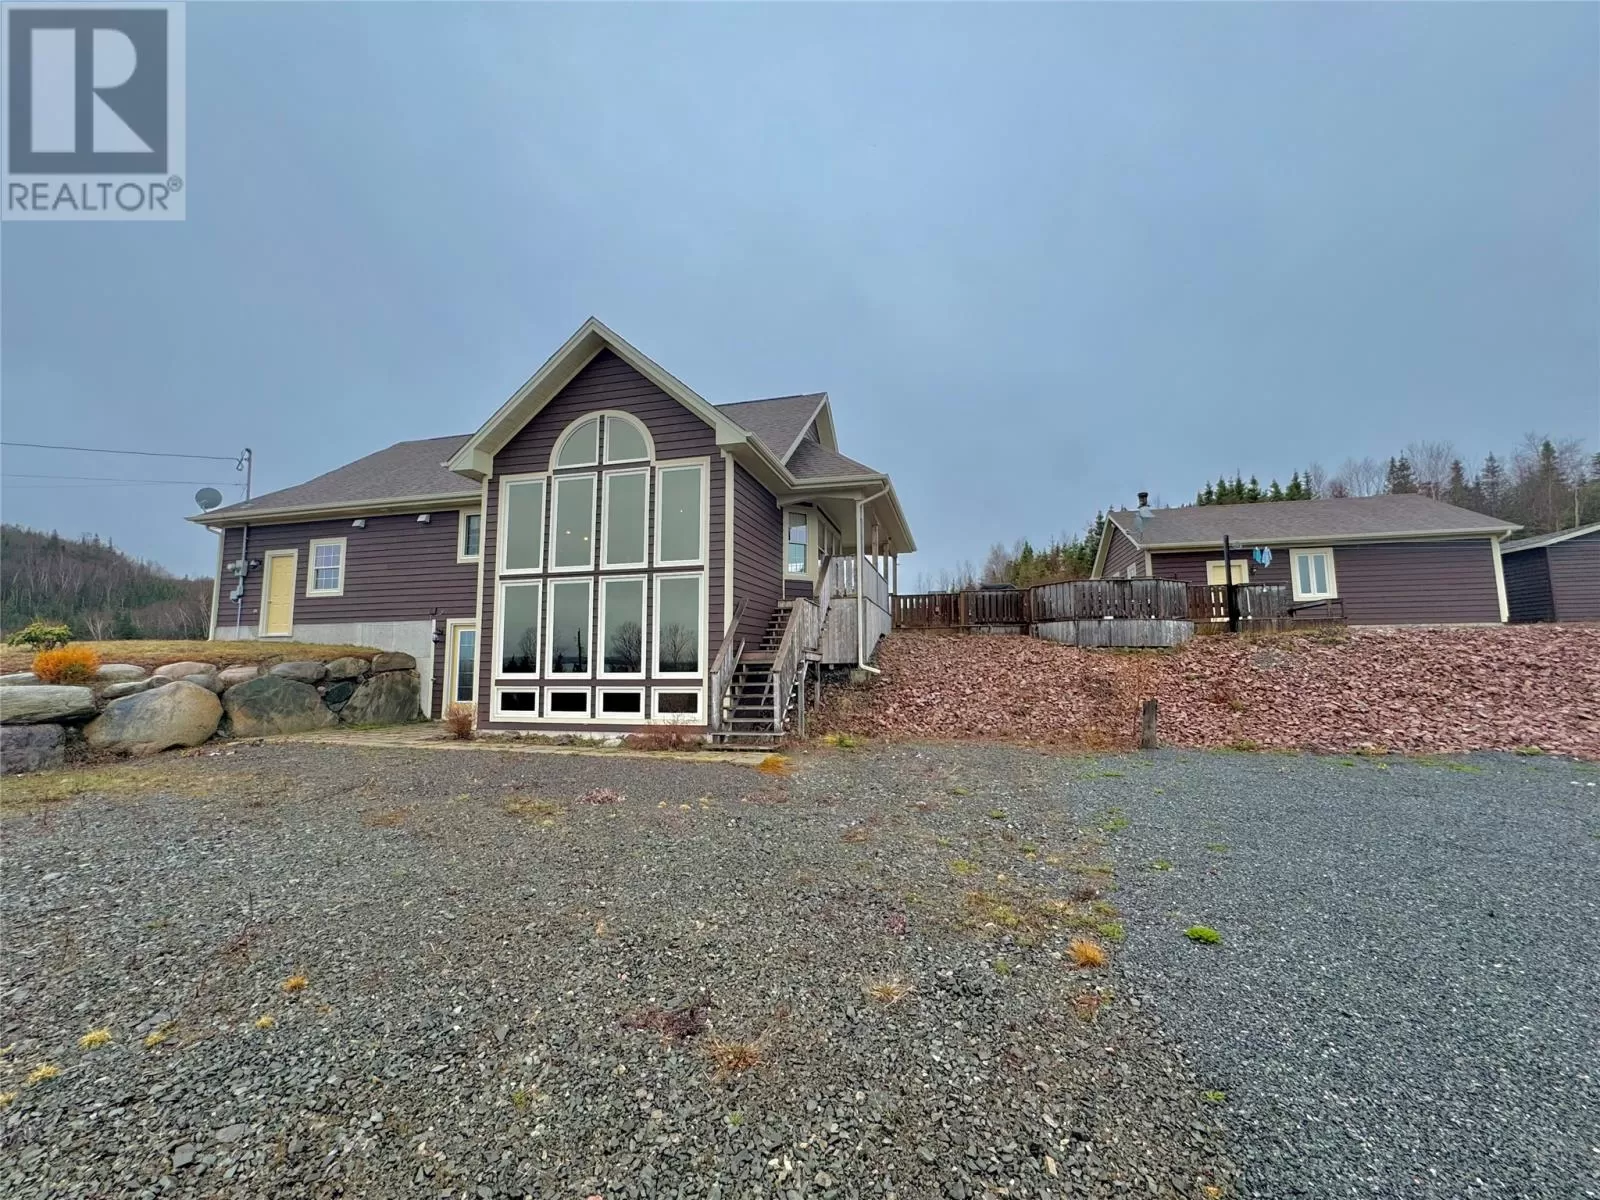 House for rent: 18 Spruce Hill Road, Georges Brook - Milton, Newfoundland & Labrador A5A 0K9